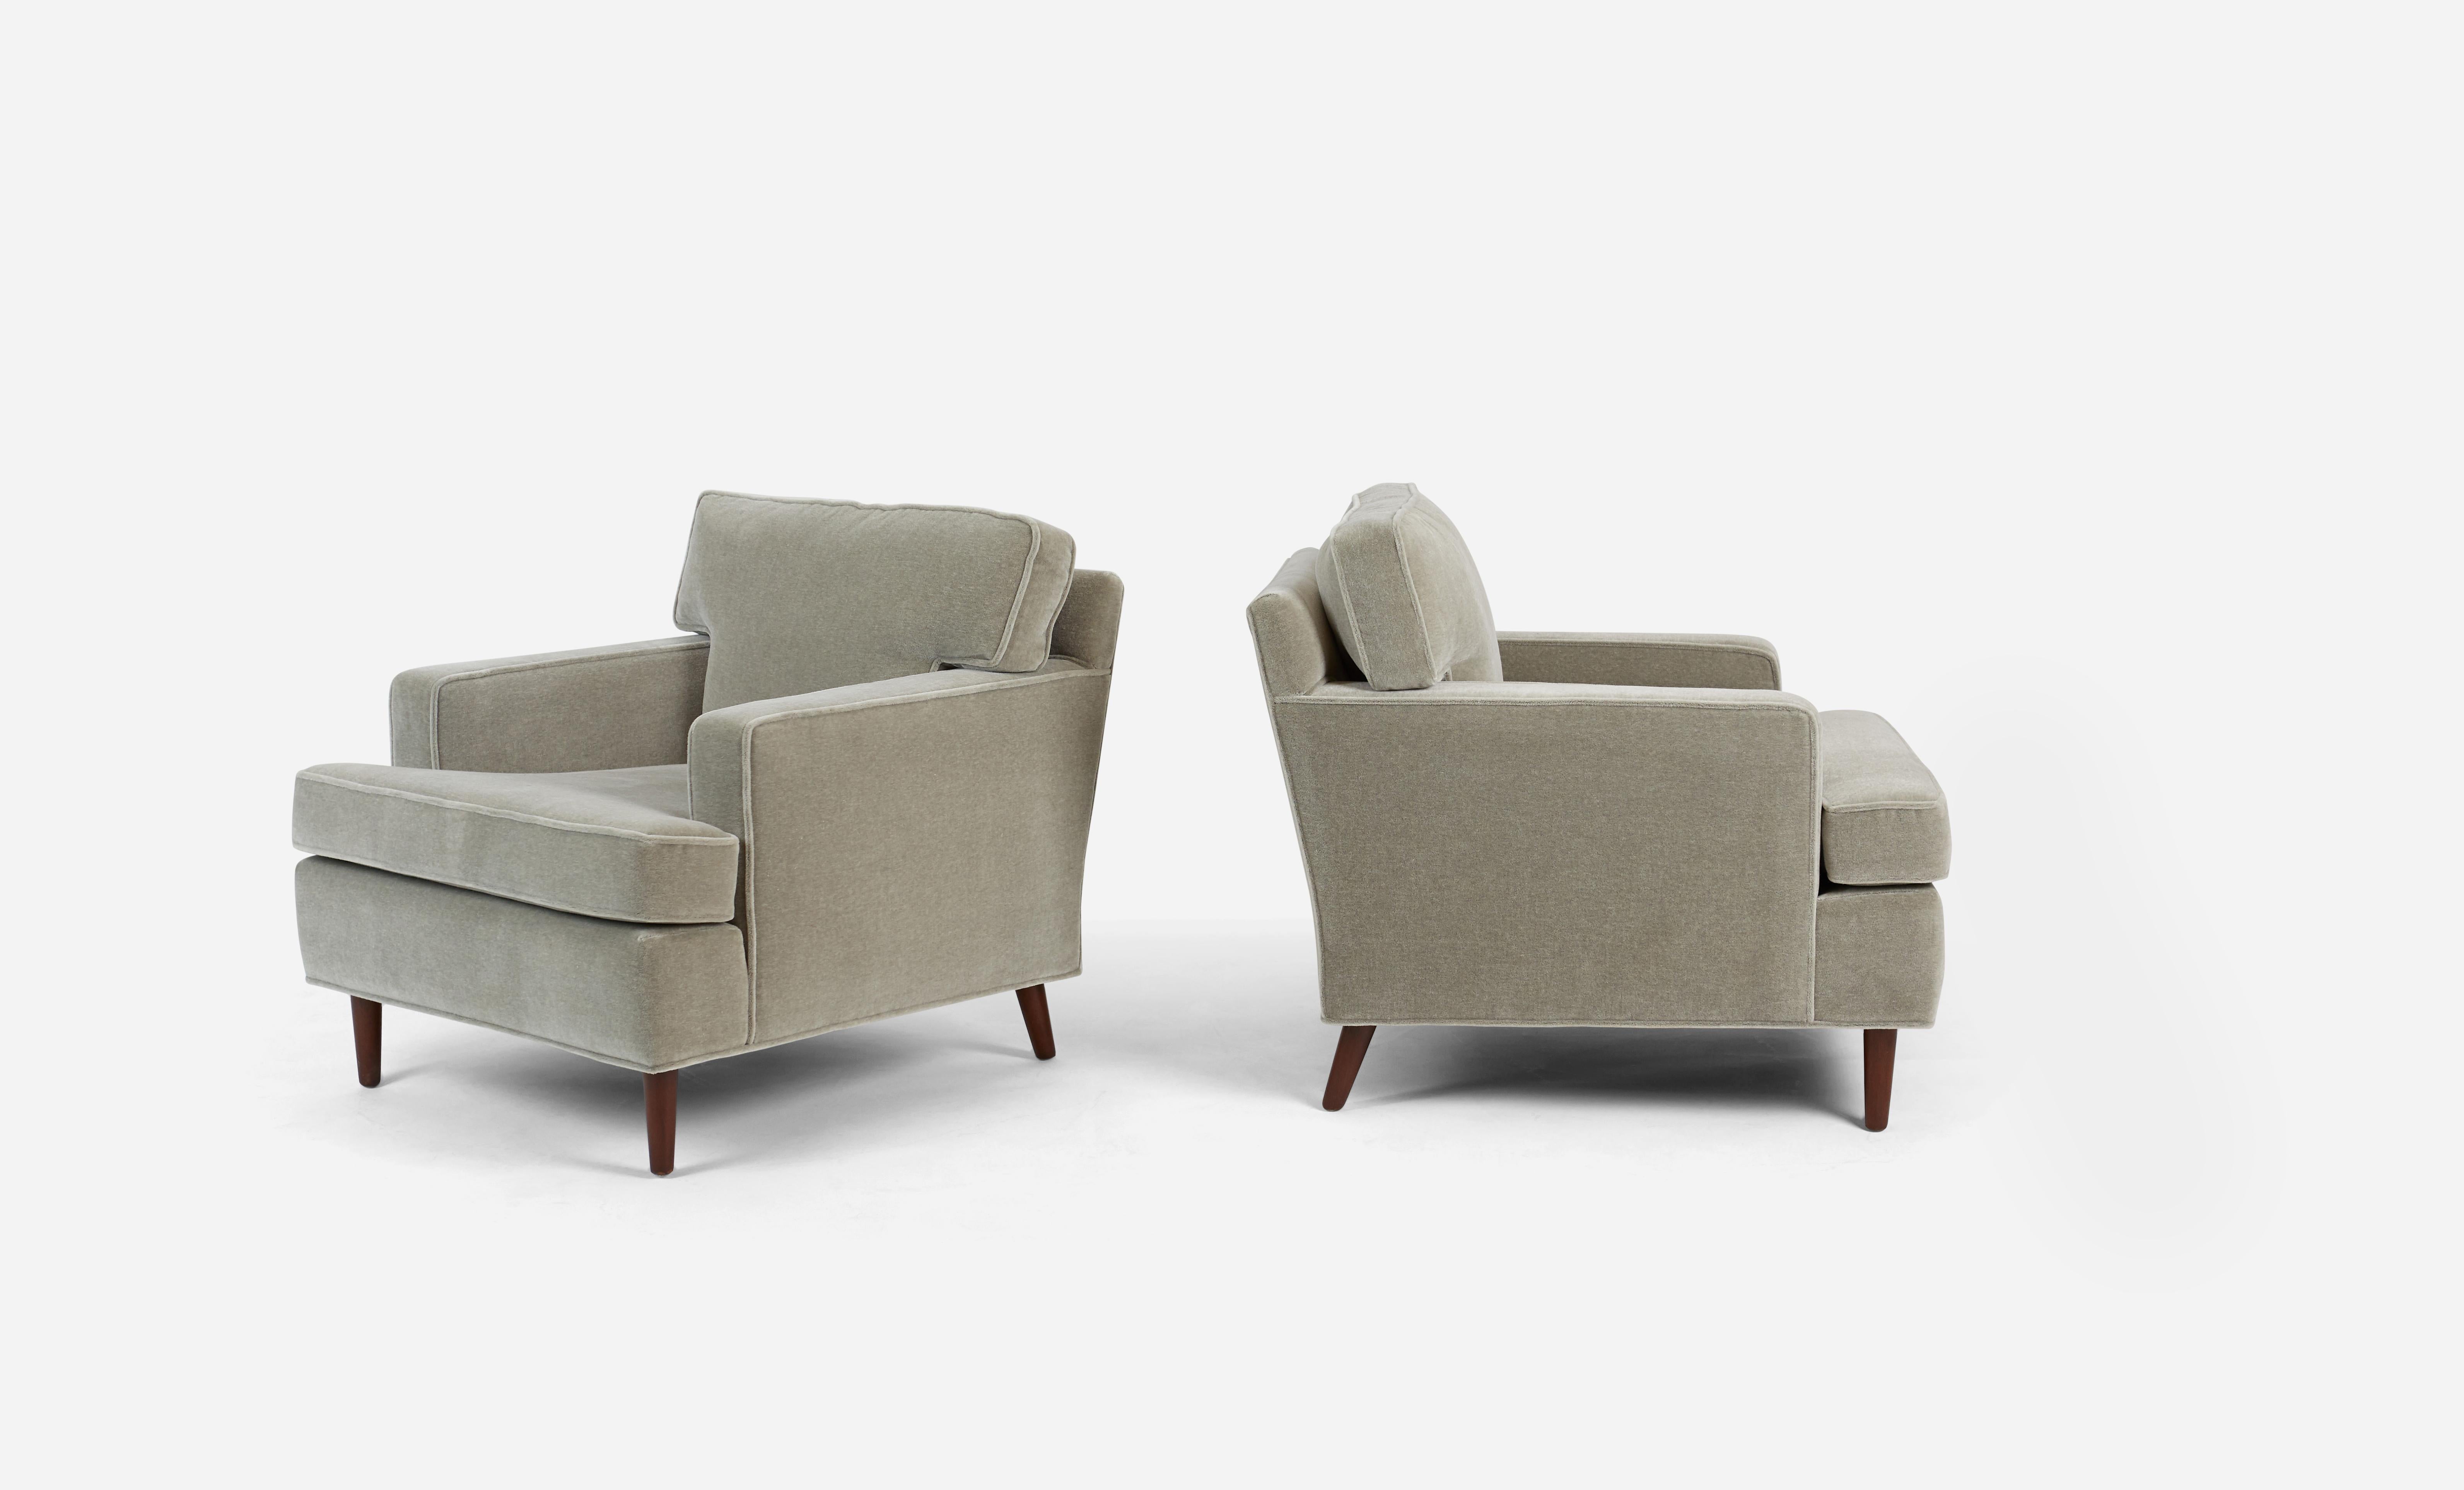 Pair of lounge chairs by Edward Wormley for Dunbar. Fully restored. Mahogany legs refinished in dark walnut tone. Reupholstered in Belgian mohair.